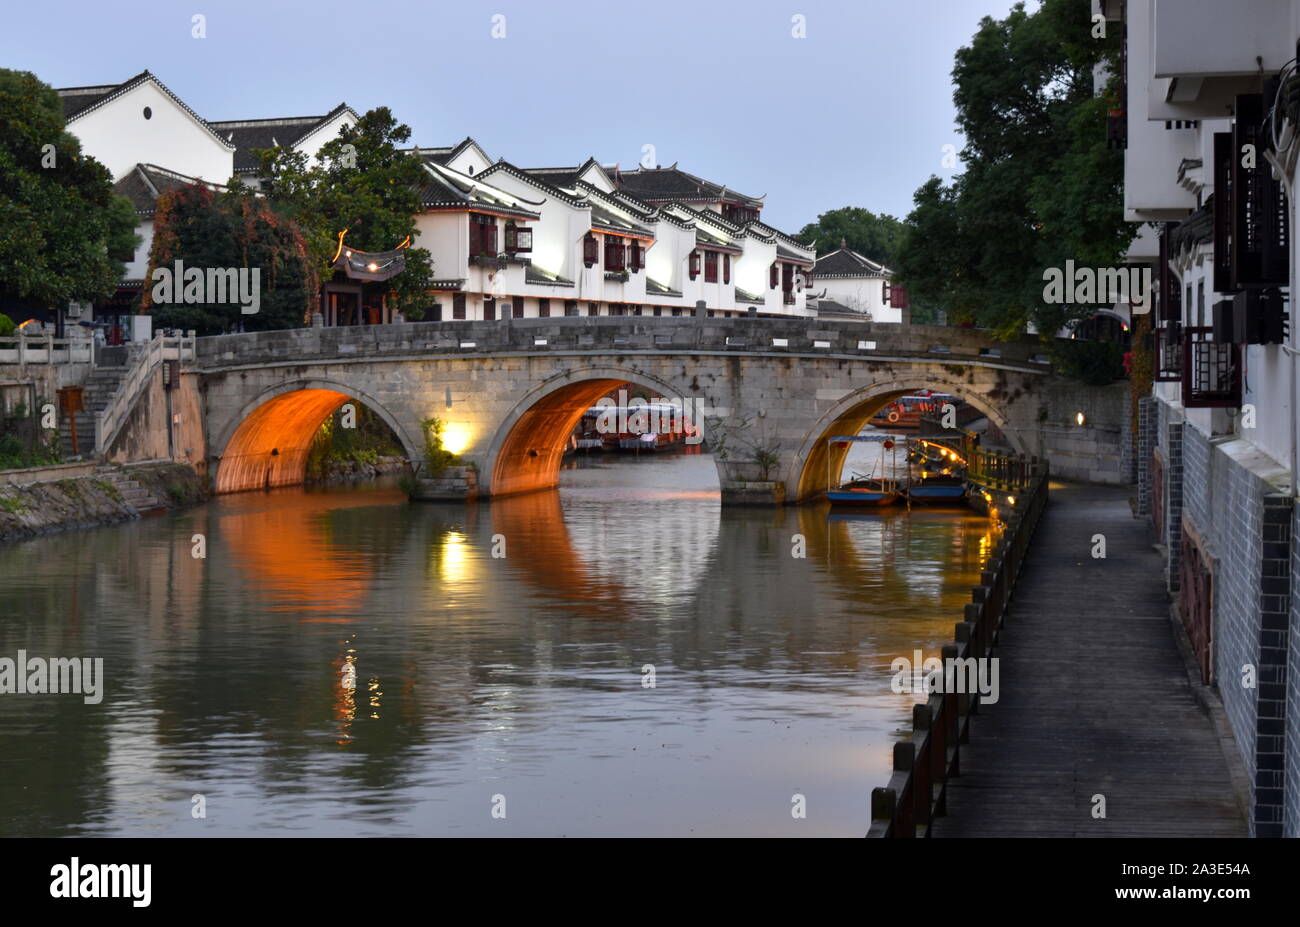 Old Chinese town canal bridge and architecture at dusk, Sanhe, Anhui, China Stock Photo